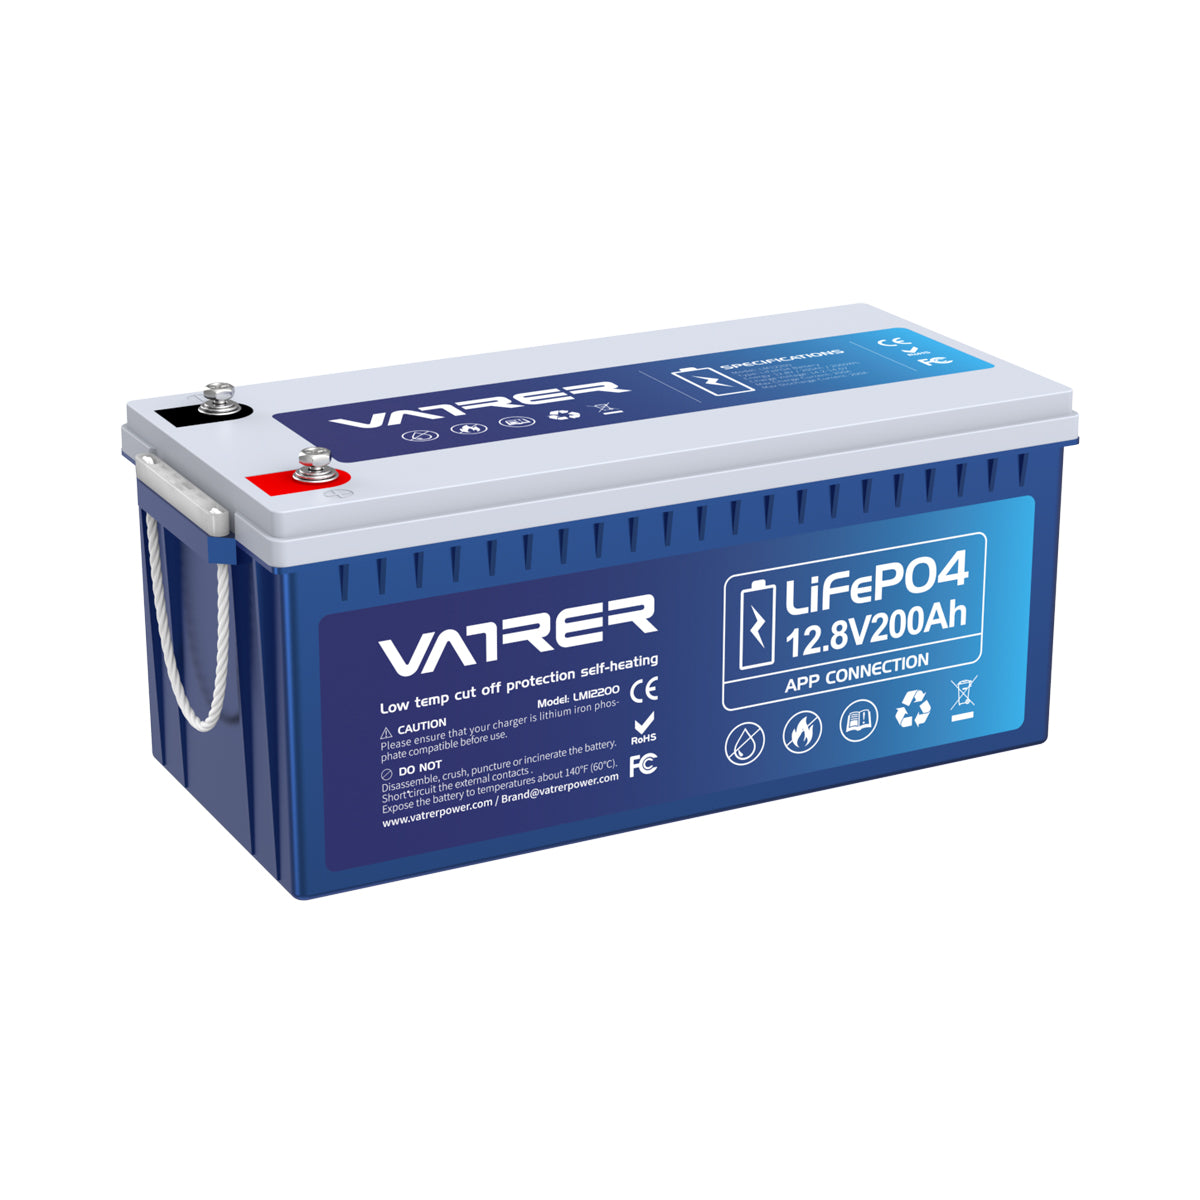 Vatrer 12V 200Ah Bluetooth LiFePO4 Lithium Battery with Self-Heating,  Built-in 200A BMS, Low Temp Cut-Off Lithium Batteries